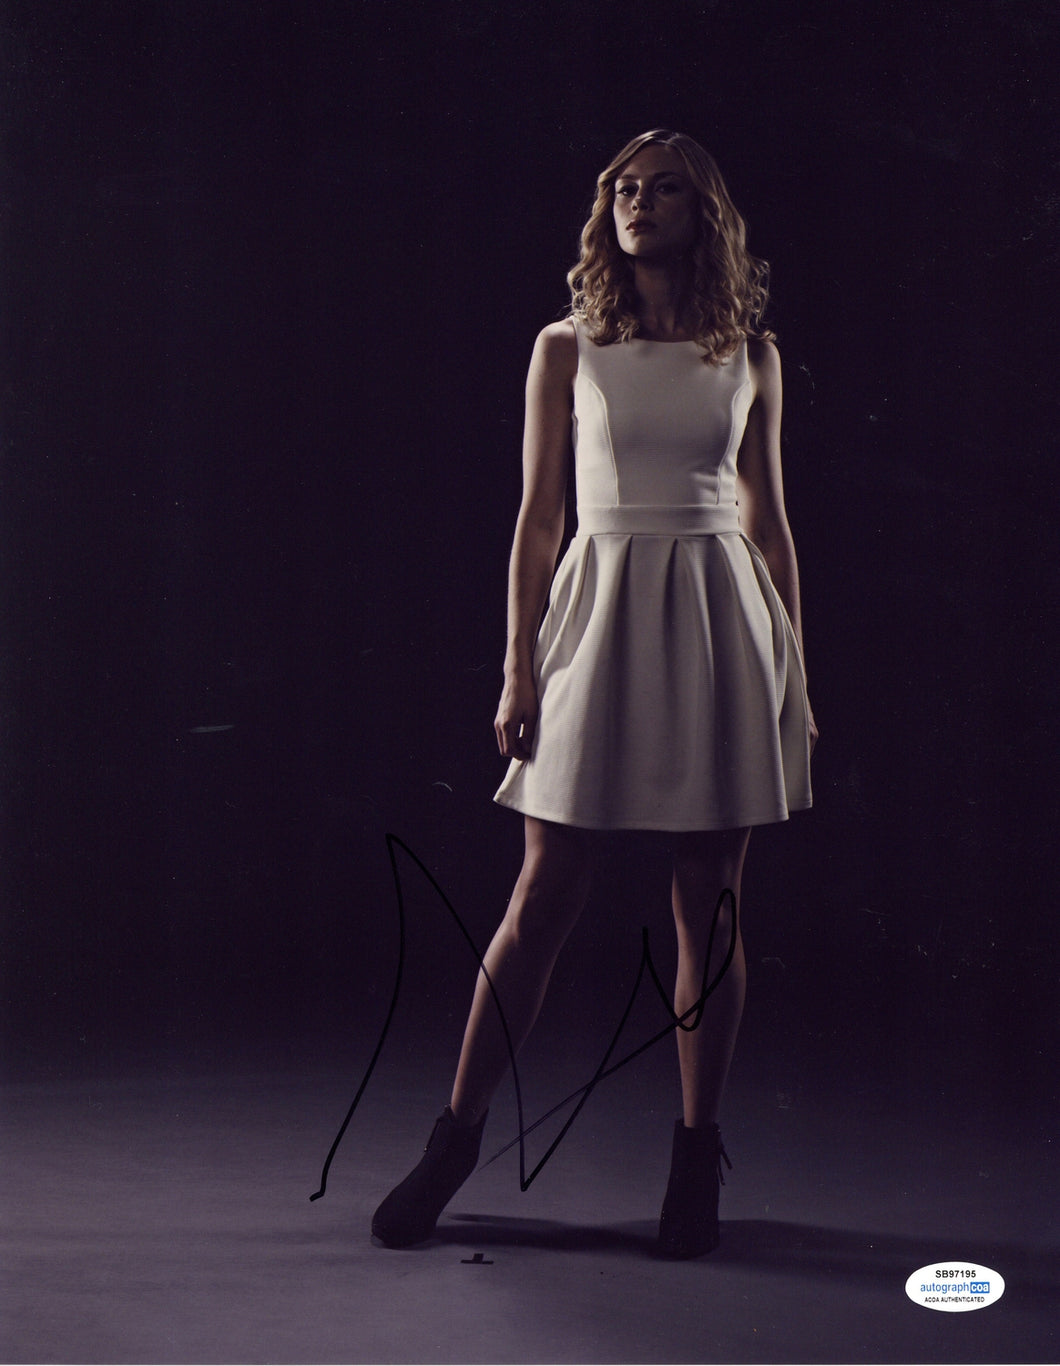 Lucy Fry Autographed Signed 11x14 Photo Vampire Academy